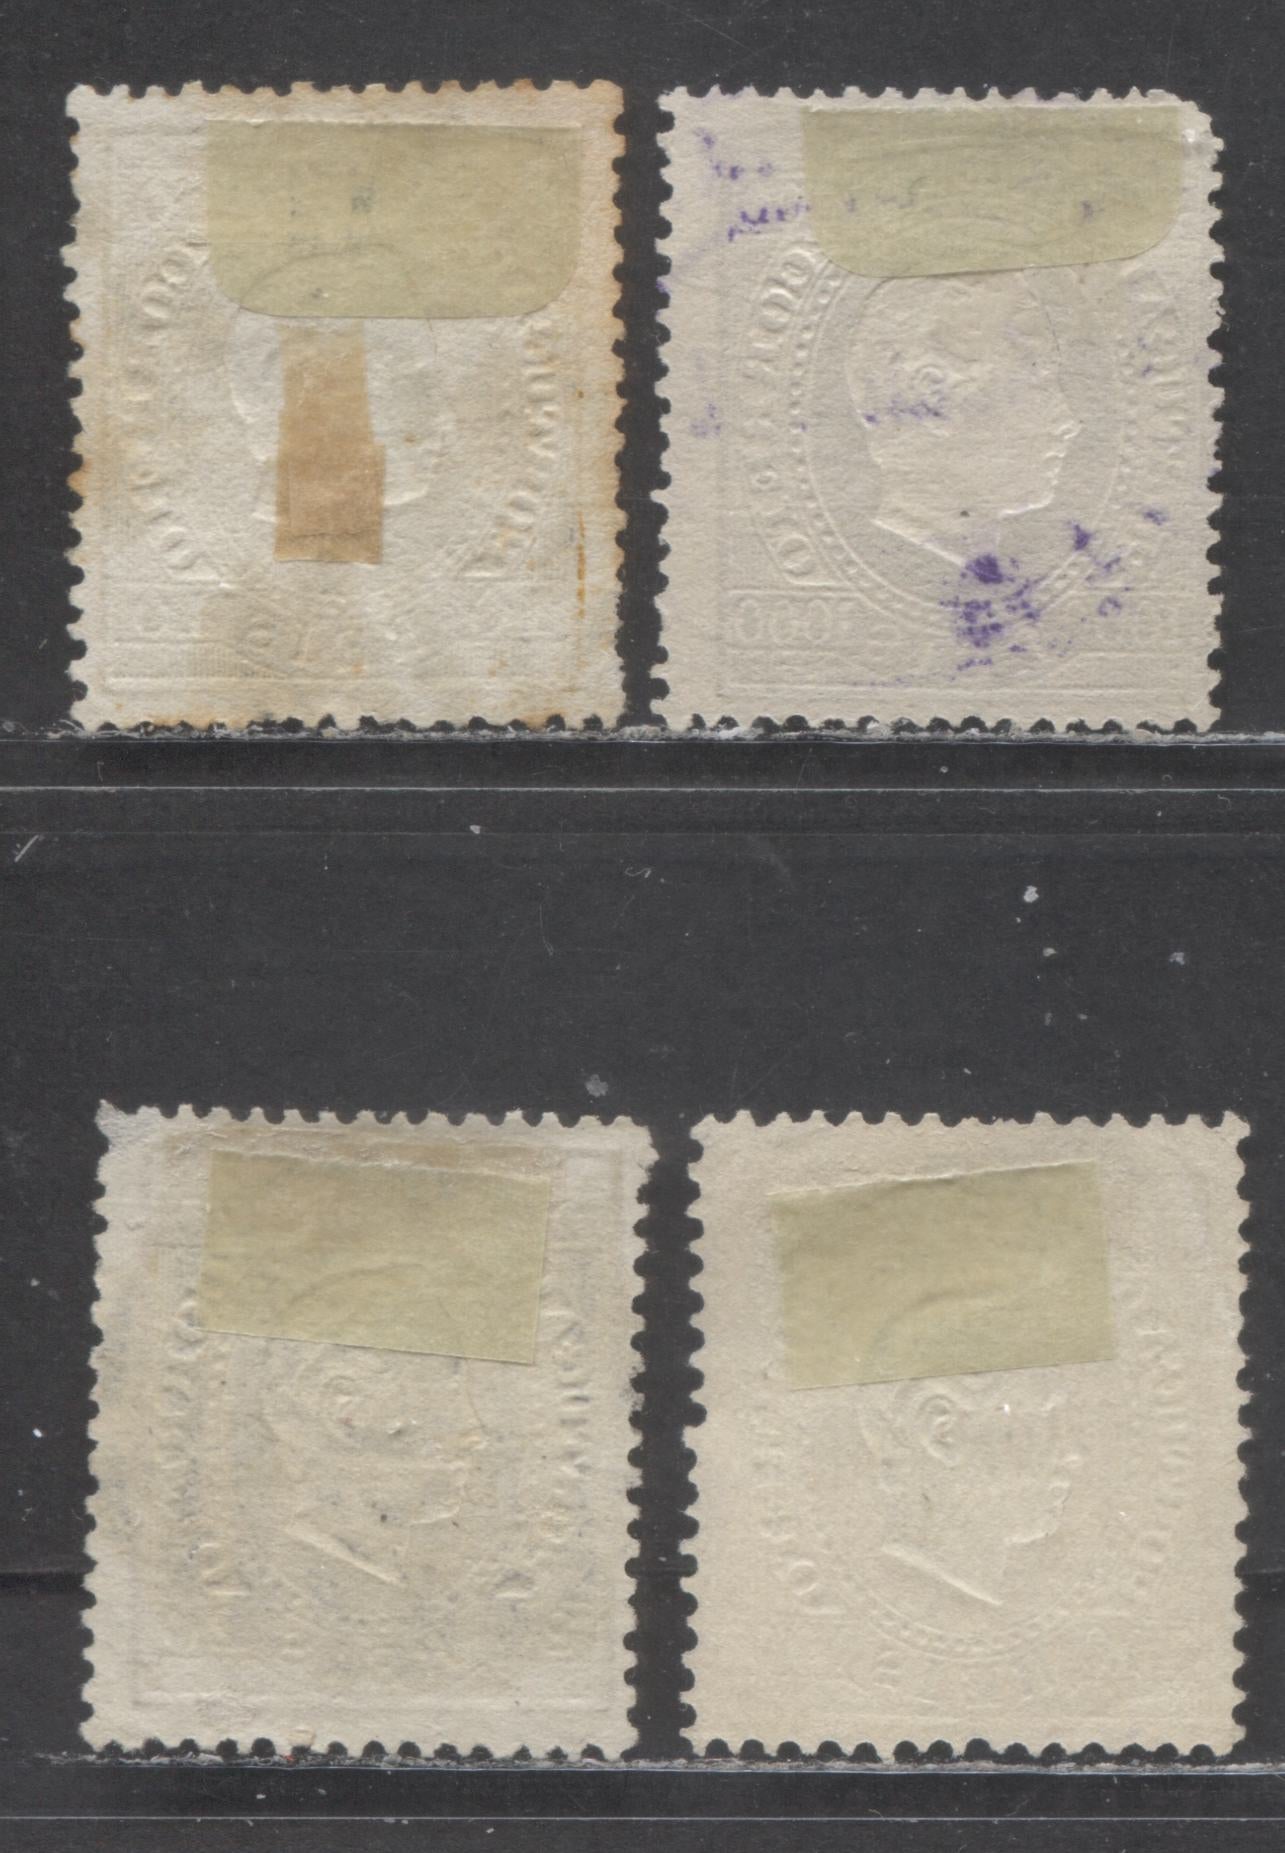 Lot 85 Portugal SC#35/51a 1870-1884 Embossed King Luiz Issue, On Ordinary & Enamelled Papers, Perfs 12.5 & 13.5, 4 Very Good Used Singles, Click on Listing to See ALL Pictures, Estimated Value $35